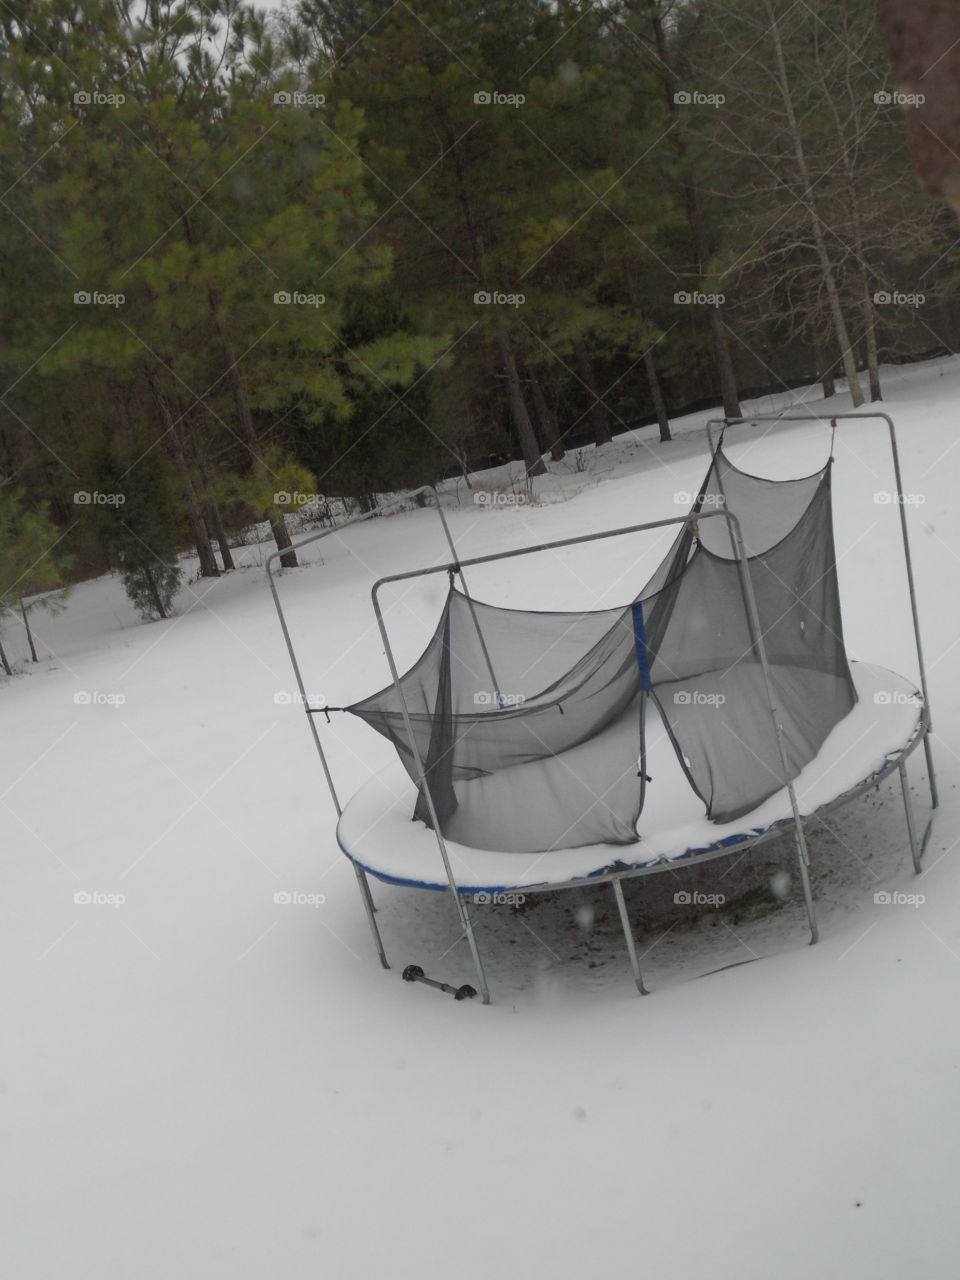 Snow in the Trampoline